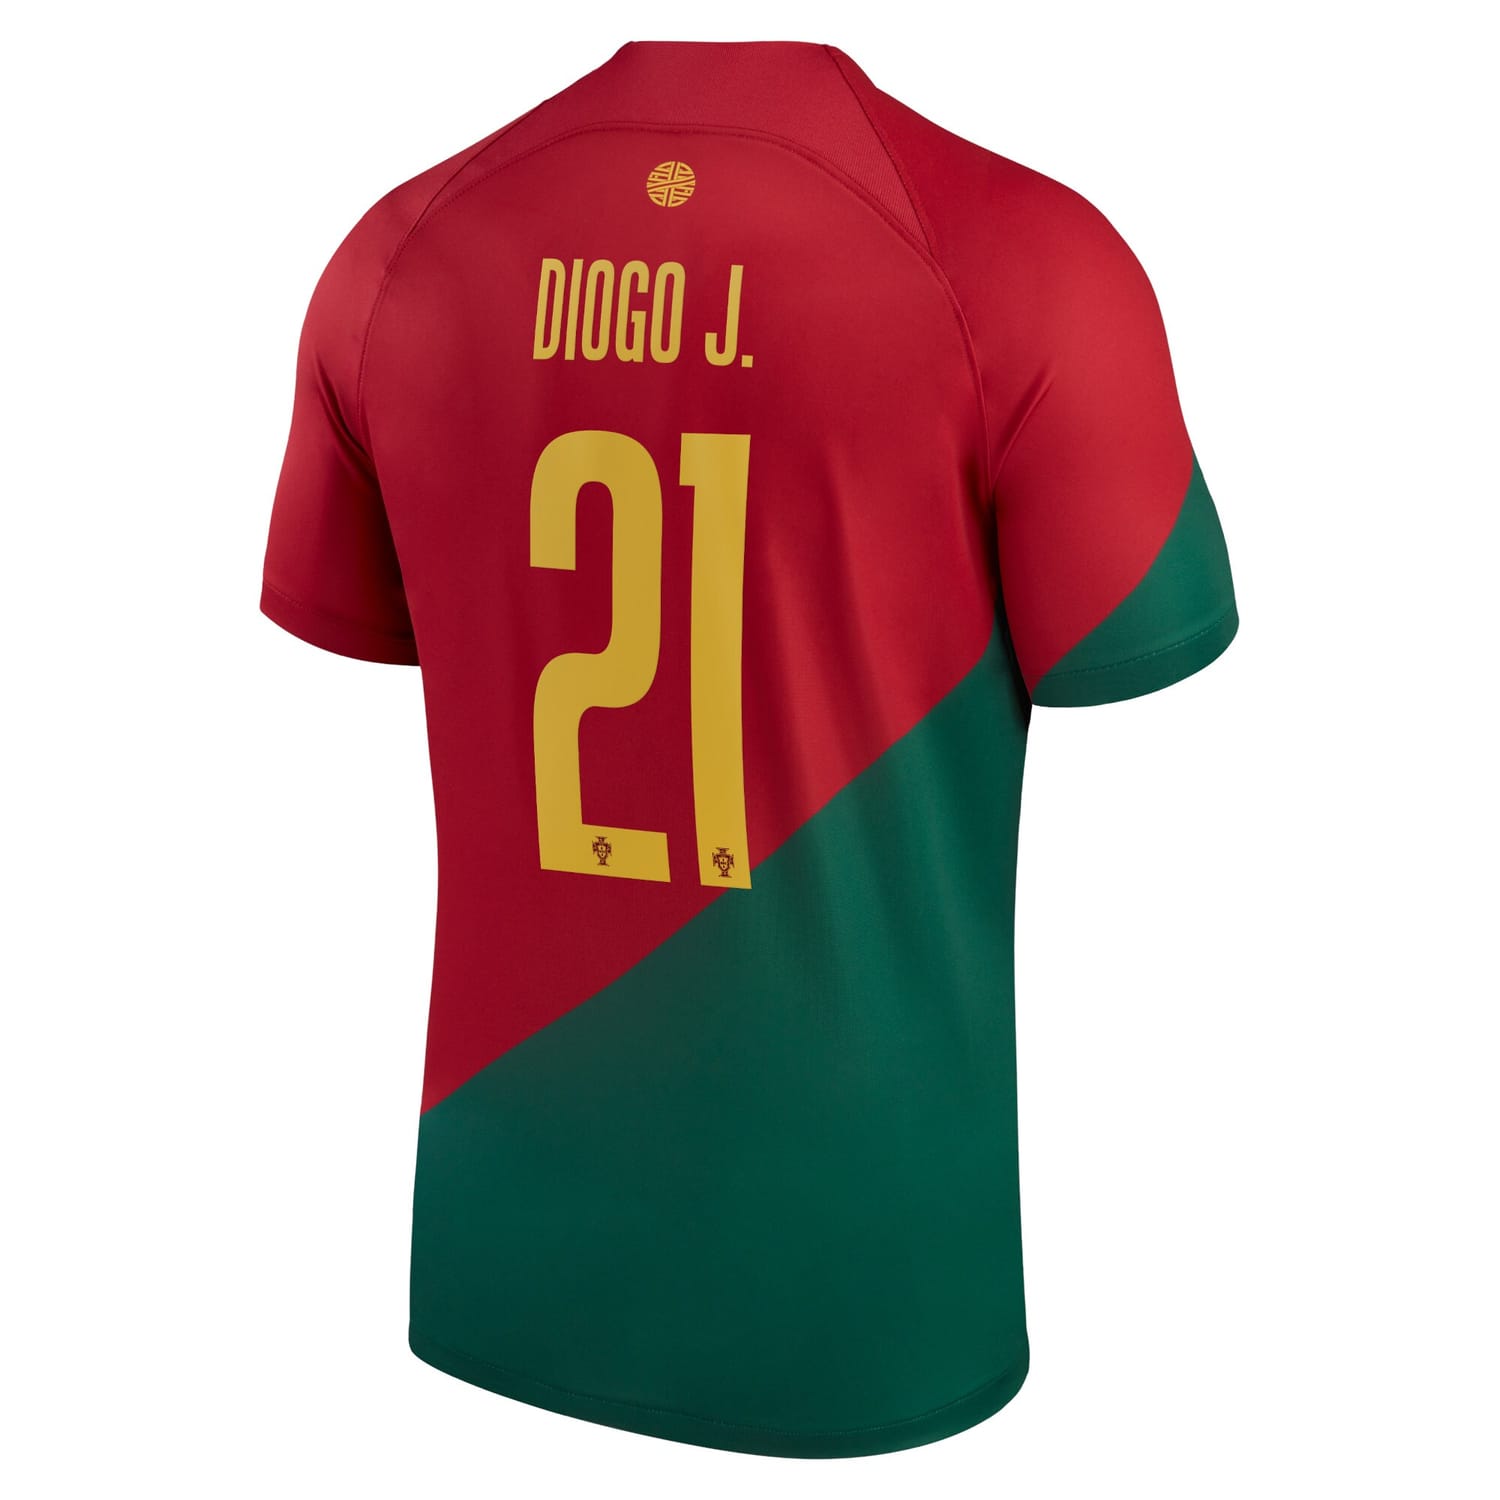 Portugal National Team Home Jersey Shirt Red 2022-23 player Diogo Jota printing for Men